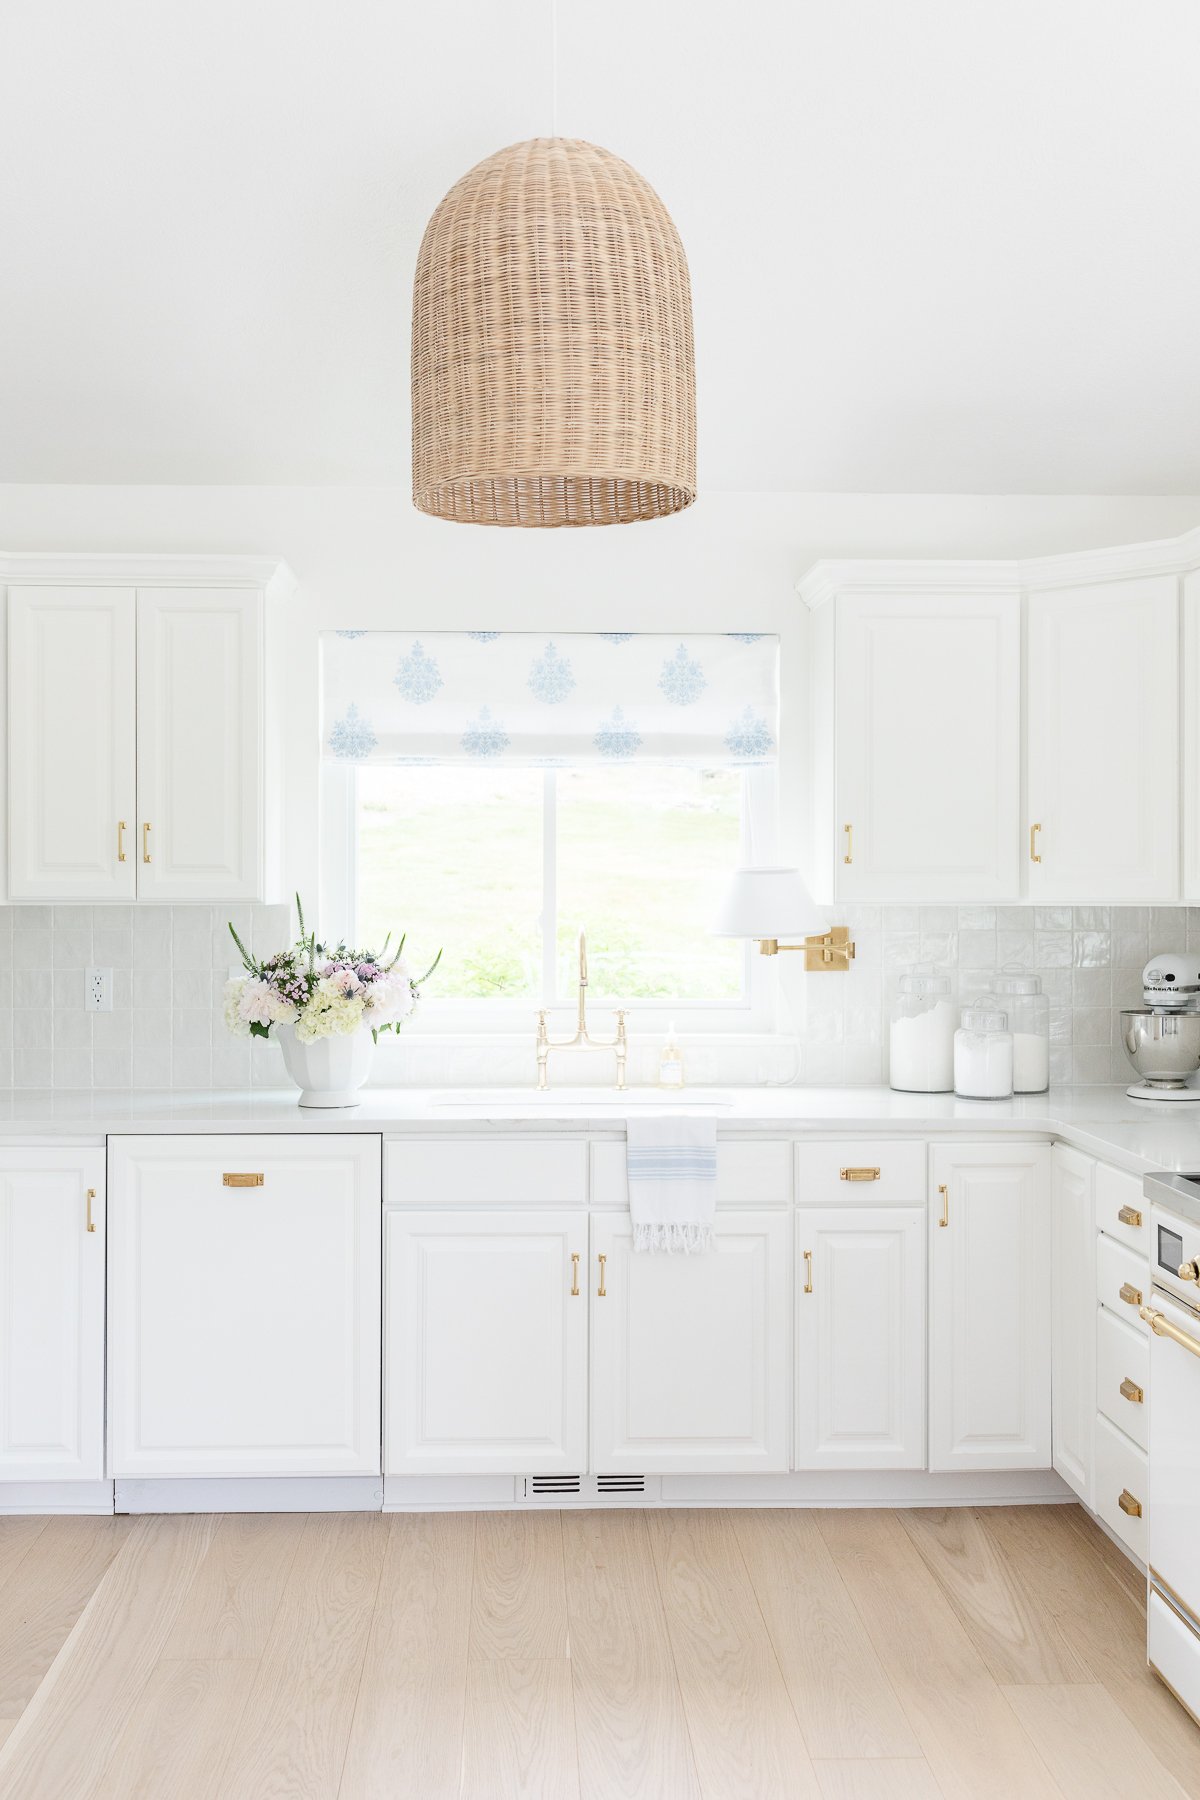 A white kitchen with a brass bridge faucet over the sink.